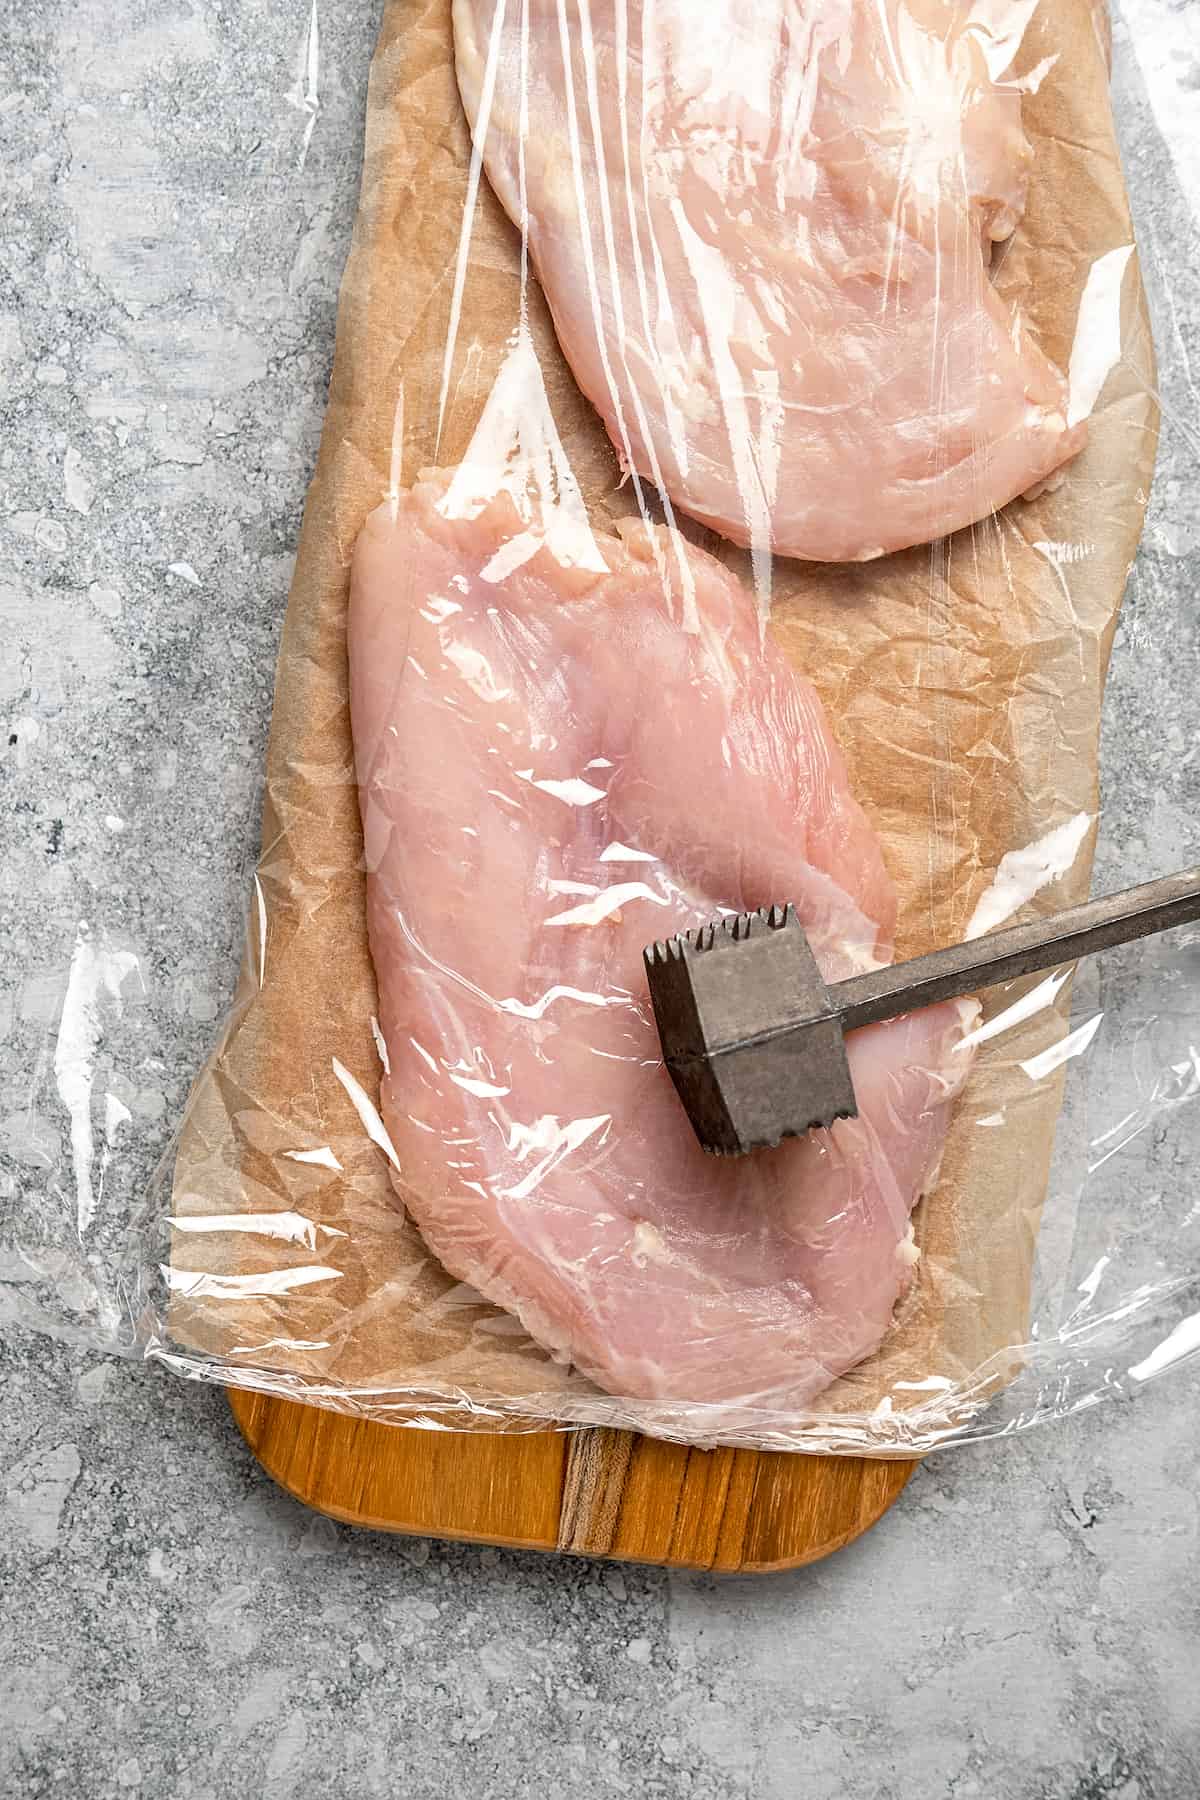 A mallet is used to flatten chicken breasts inside a sealed plastic bag on top of a wooden board.